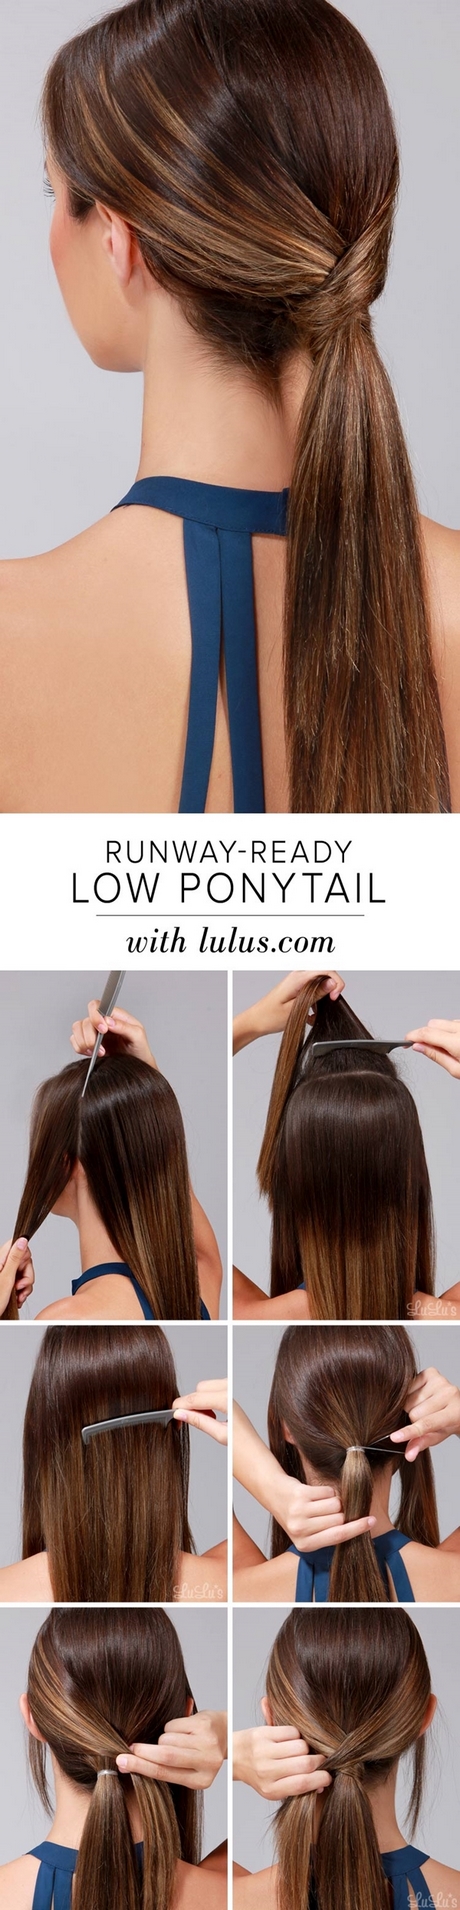 Easy hairstyles to do with long hair easy-hairstyles-to-do-with-long-hair-10_13